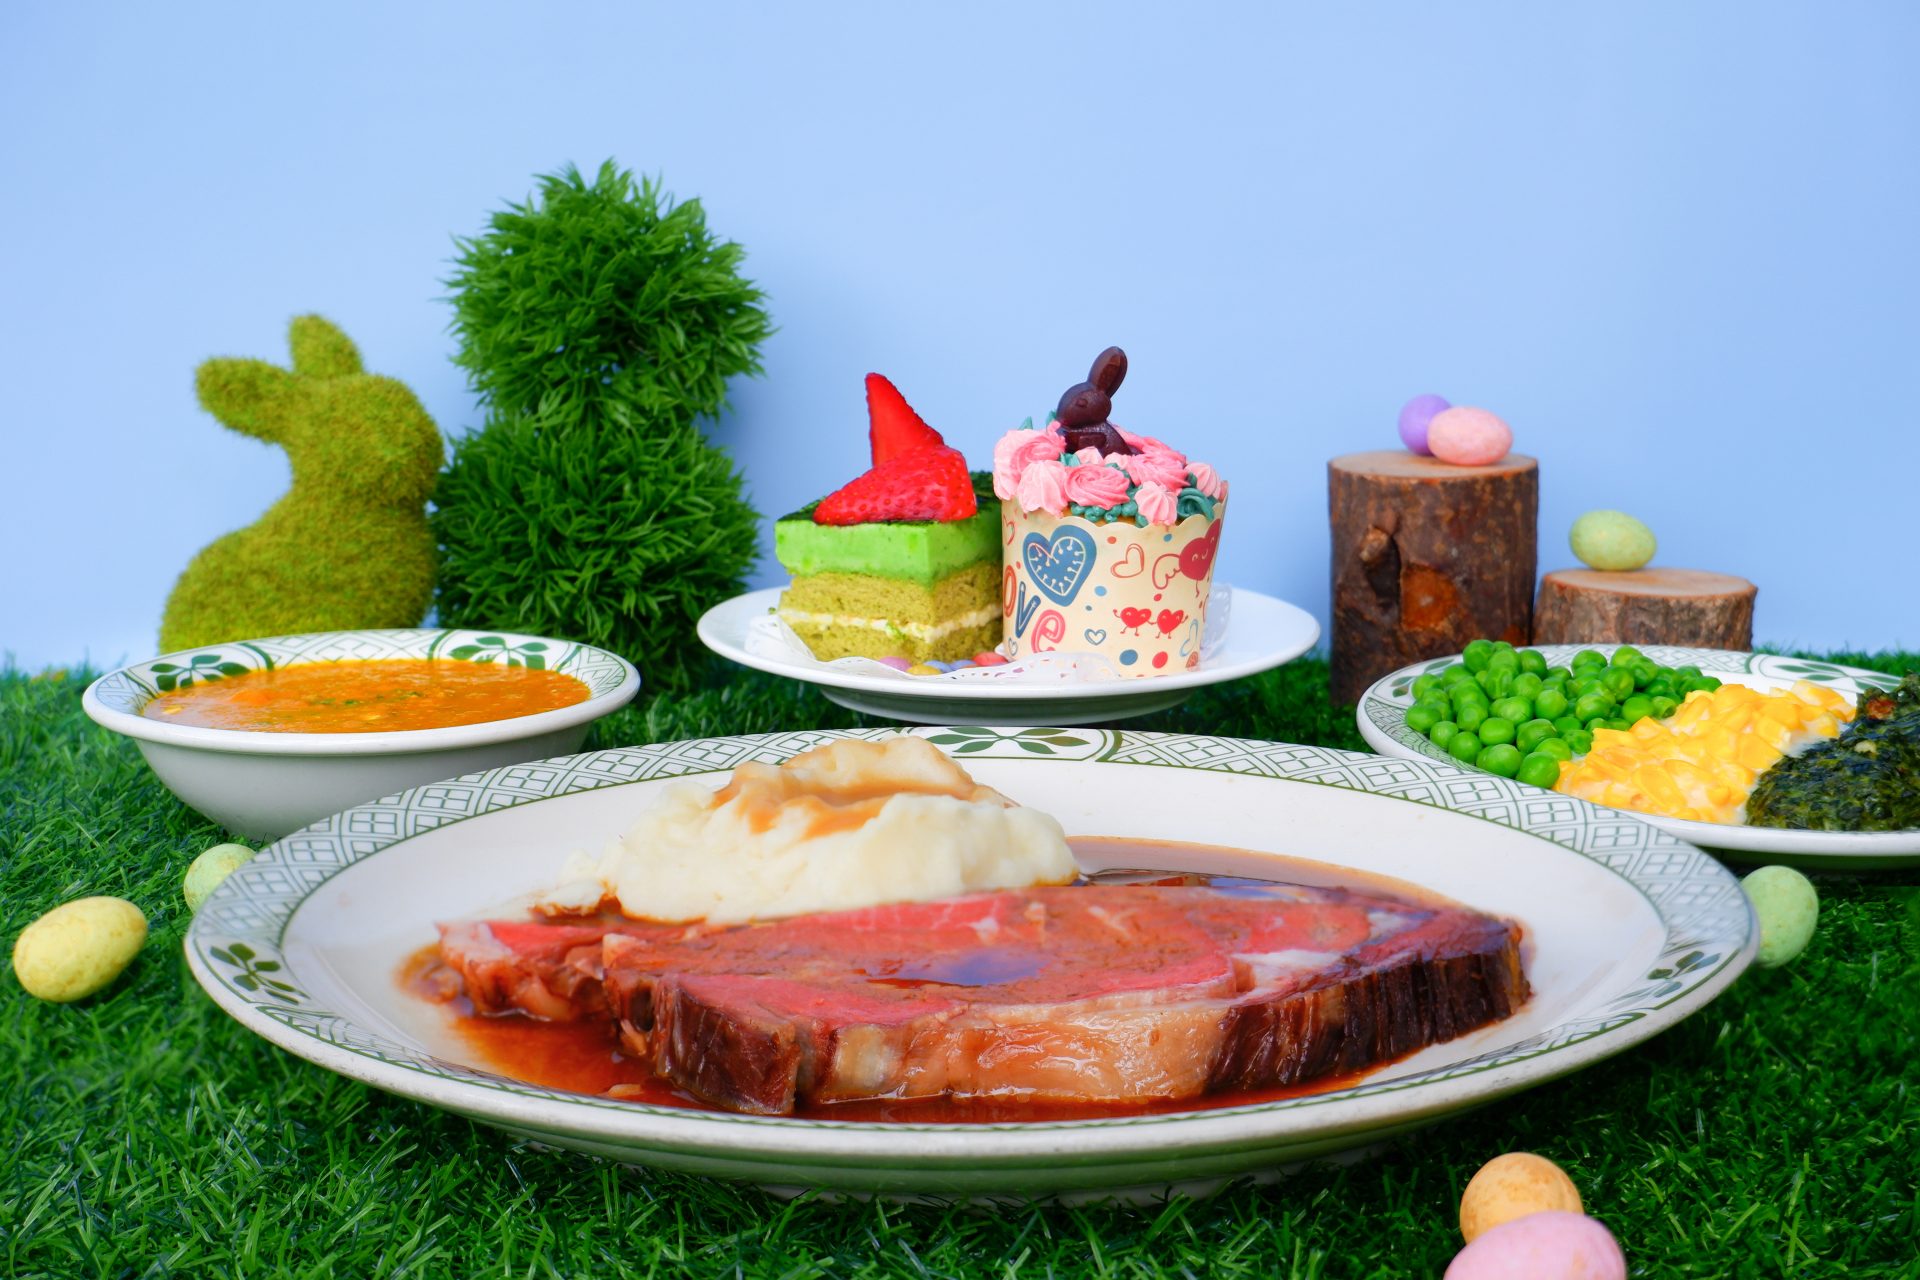 Easter - Lawry's The Prime Rib Singapore